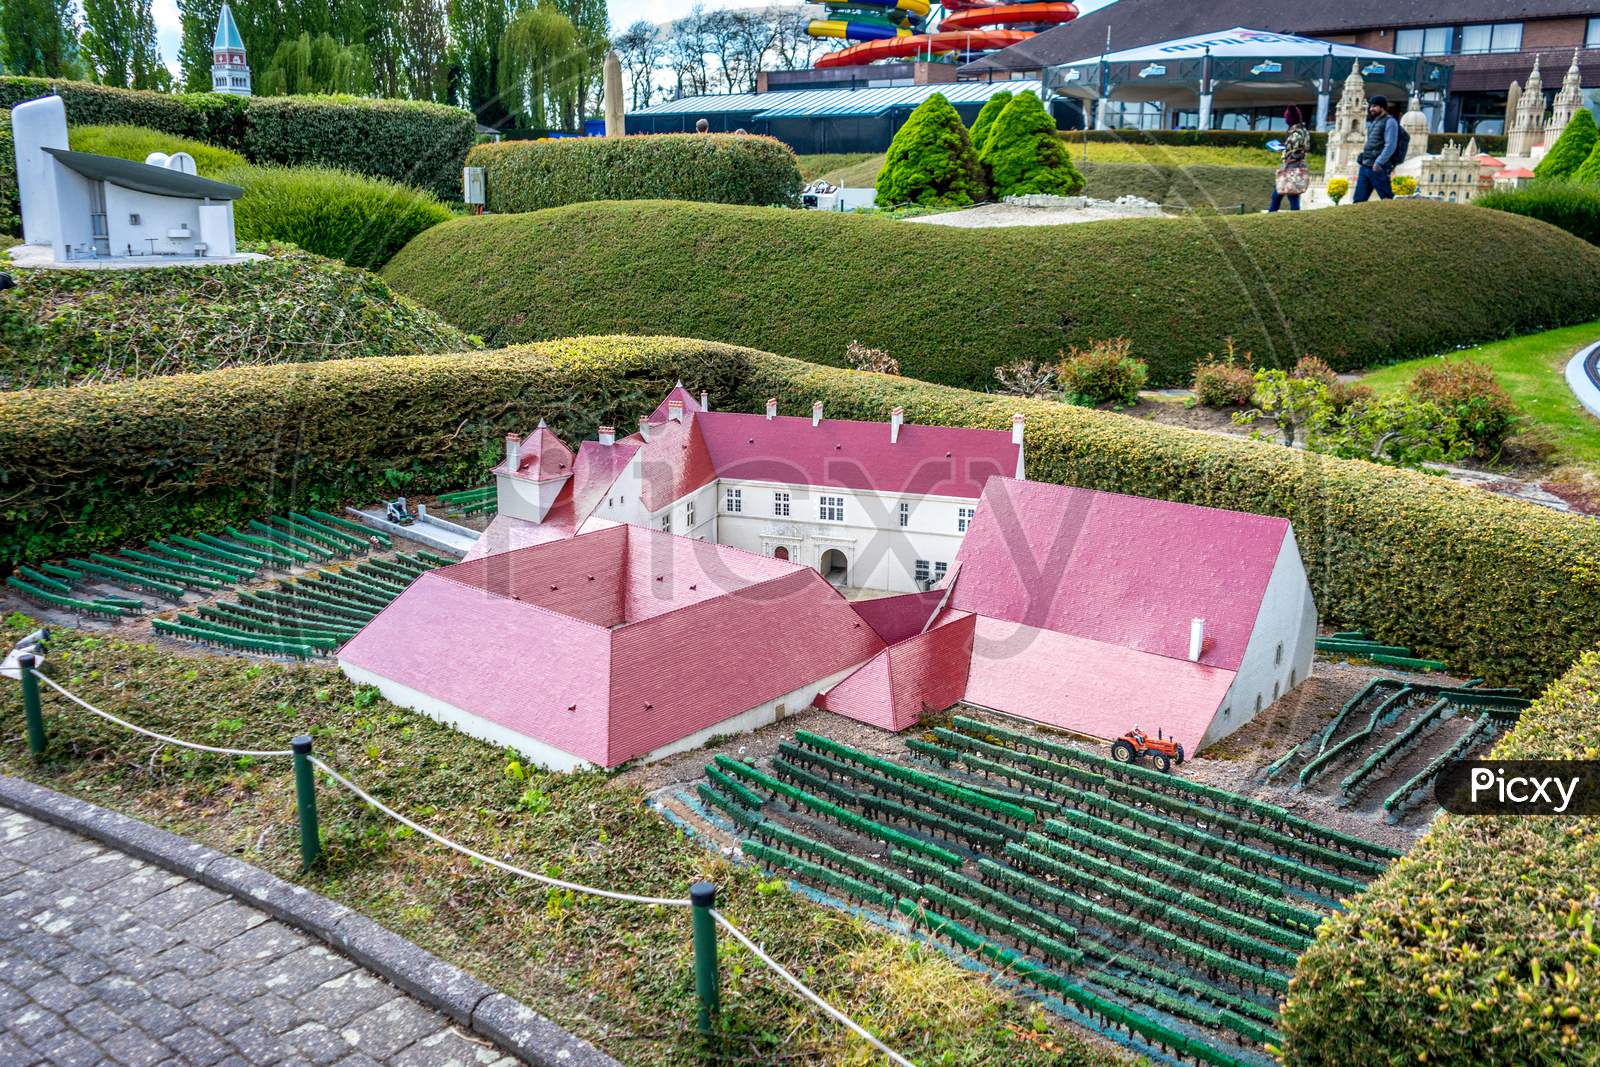 Brussels, Belgium - 17 April 2017: Miniatures At The Park Mini-Europe - Reproduction Of The Castle In Clos Vougeot, France